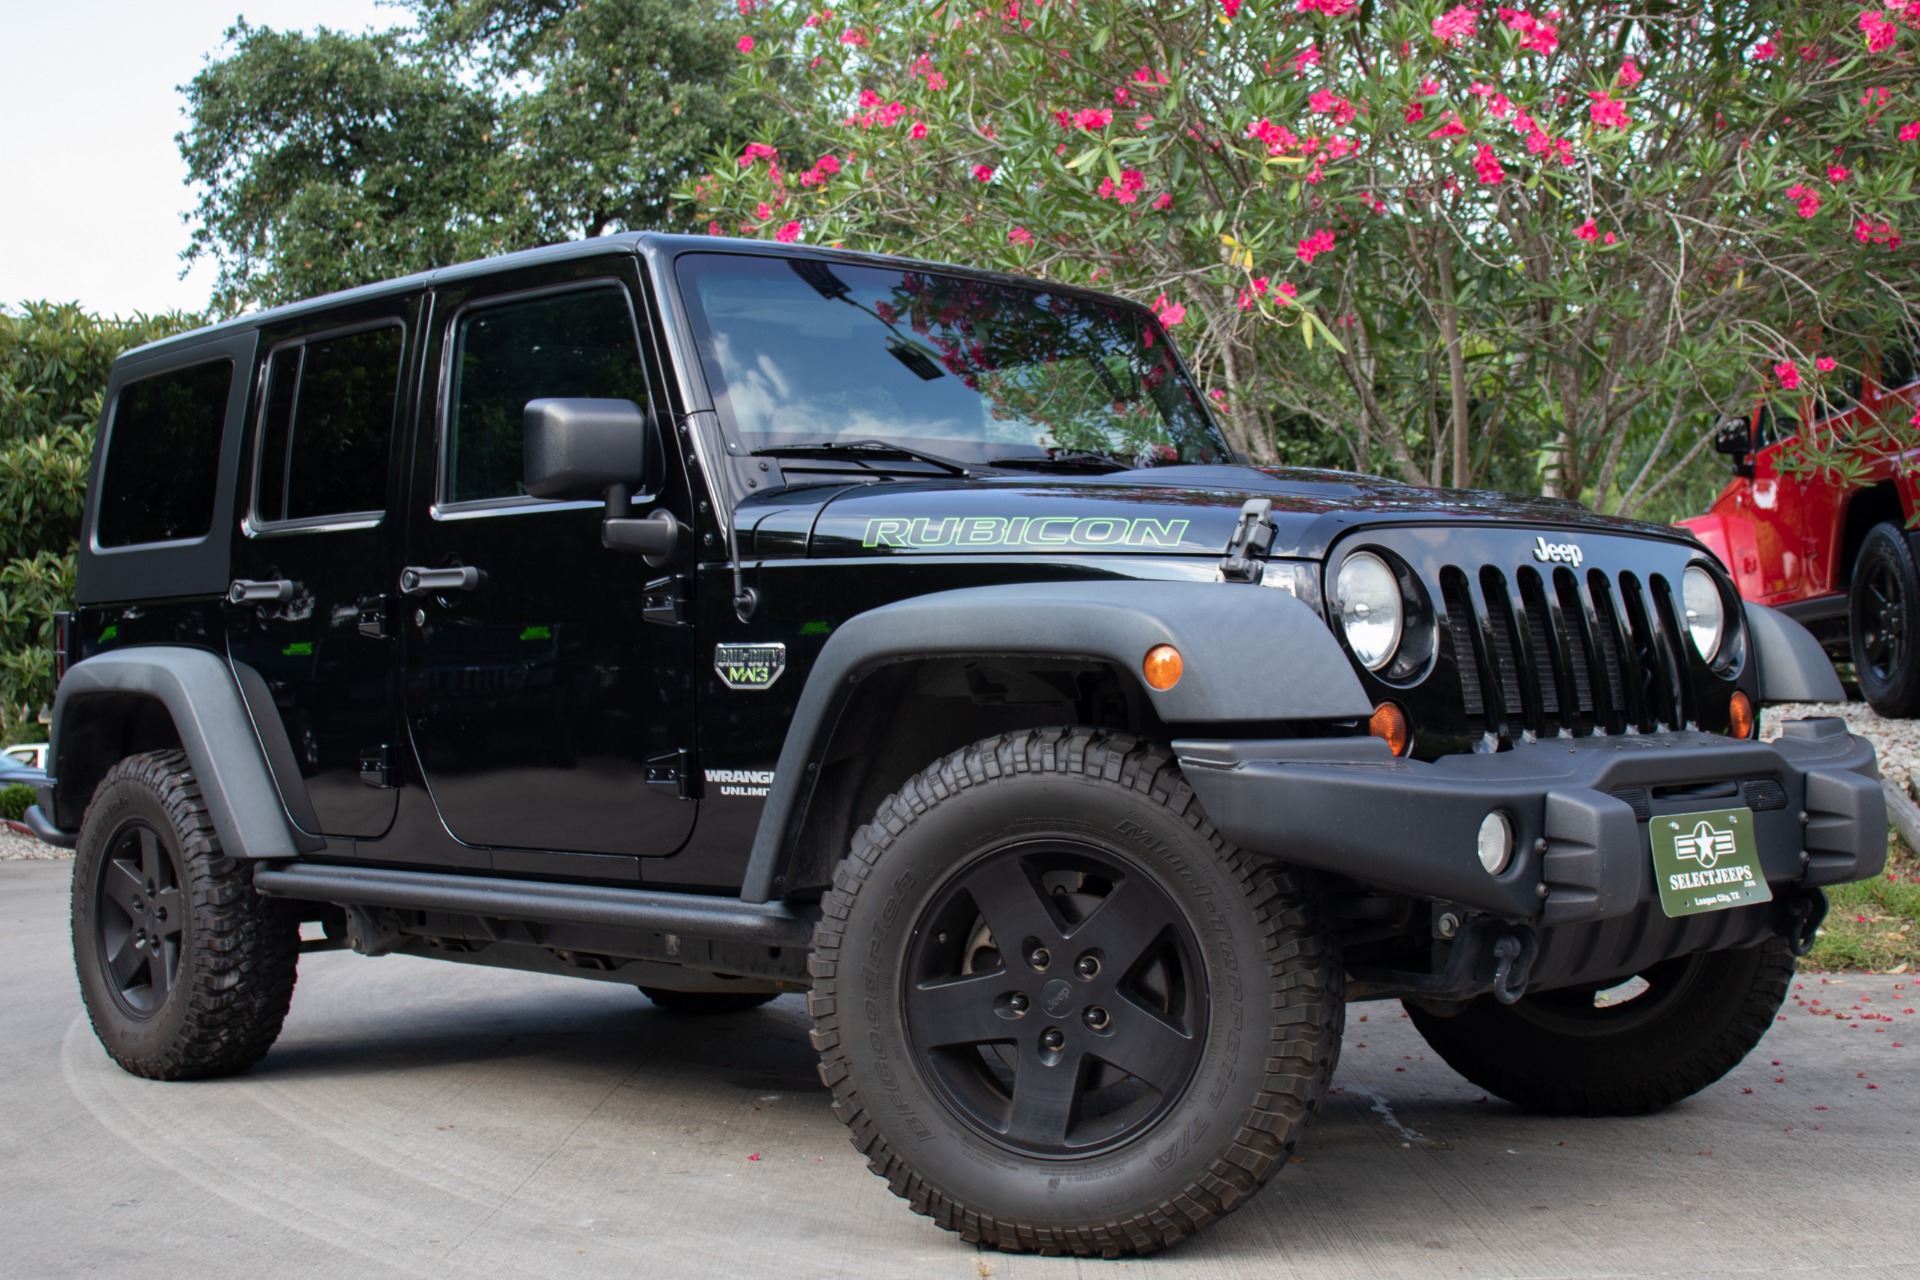 Used-2012-Jeep-Wrangler-Unlimited-Call-of-Duty-MW3